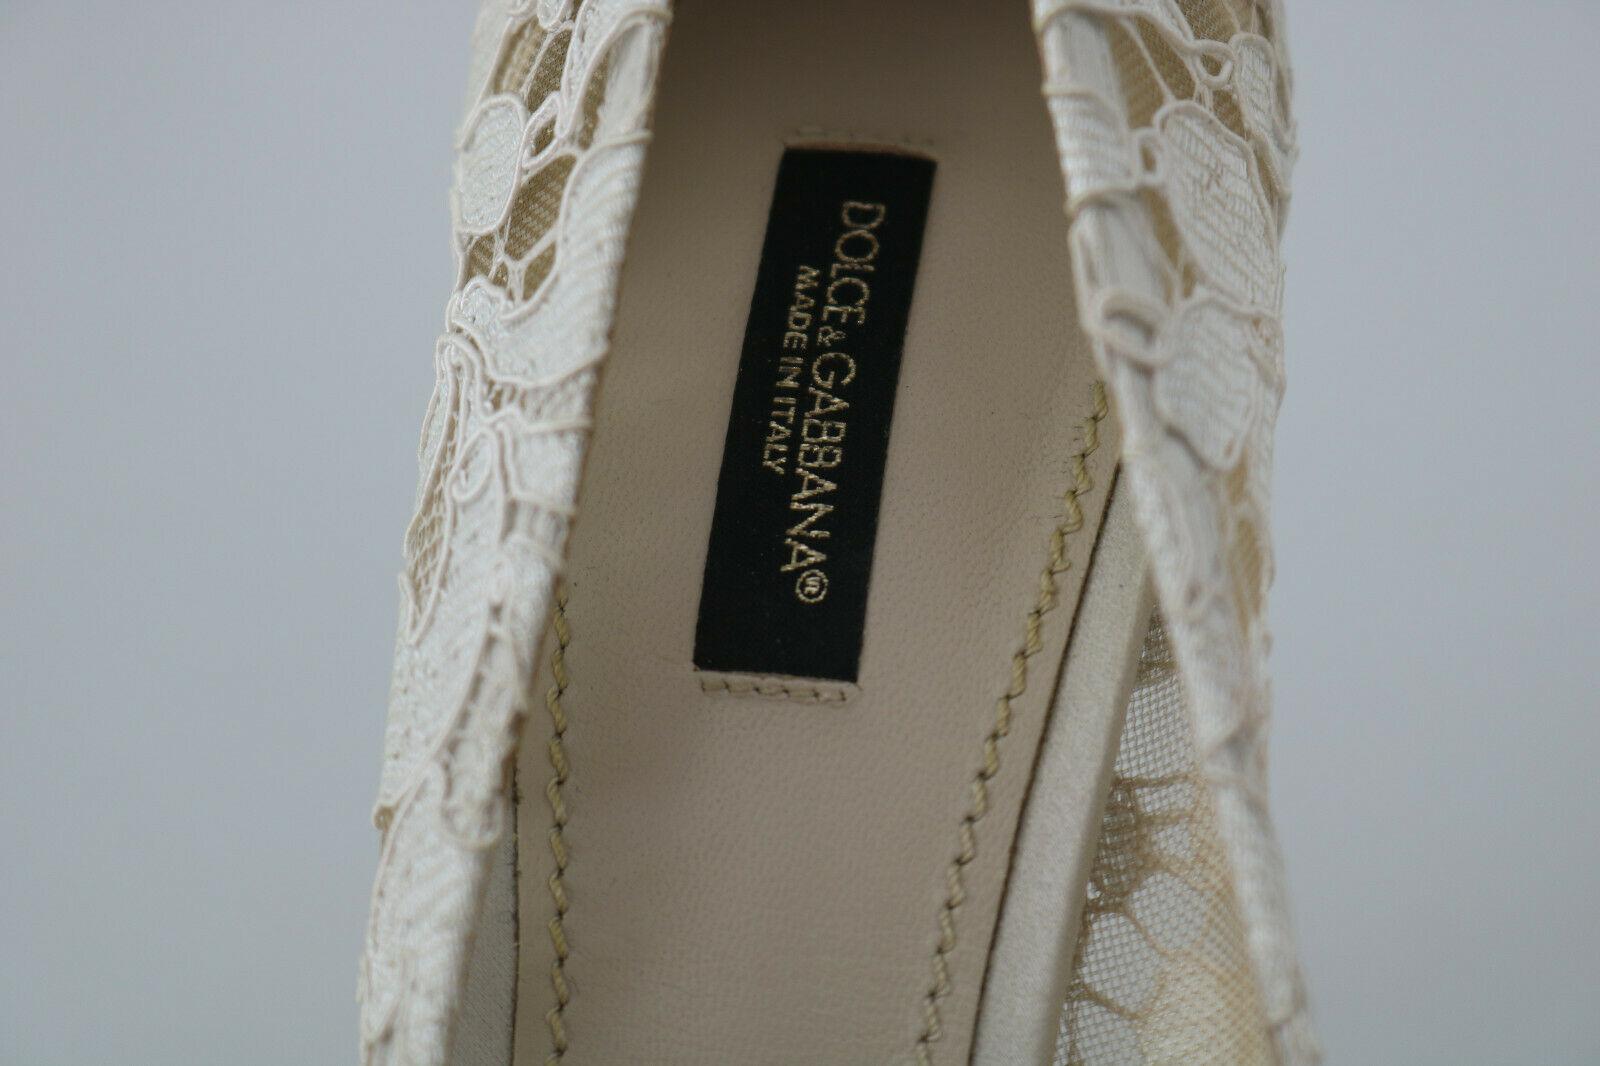 Brown Dolce & Gabbana White Lace Pointy Pumps Heels Shoes Floral Jewel Crystals